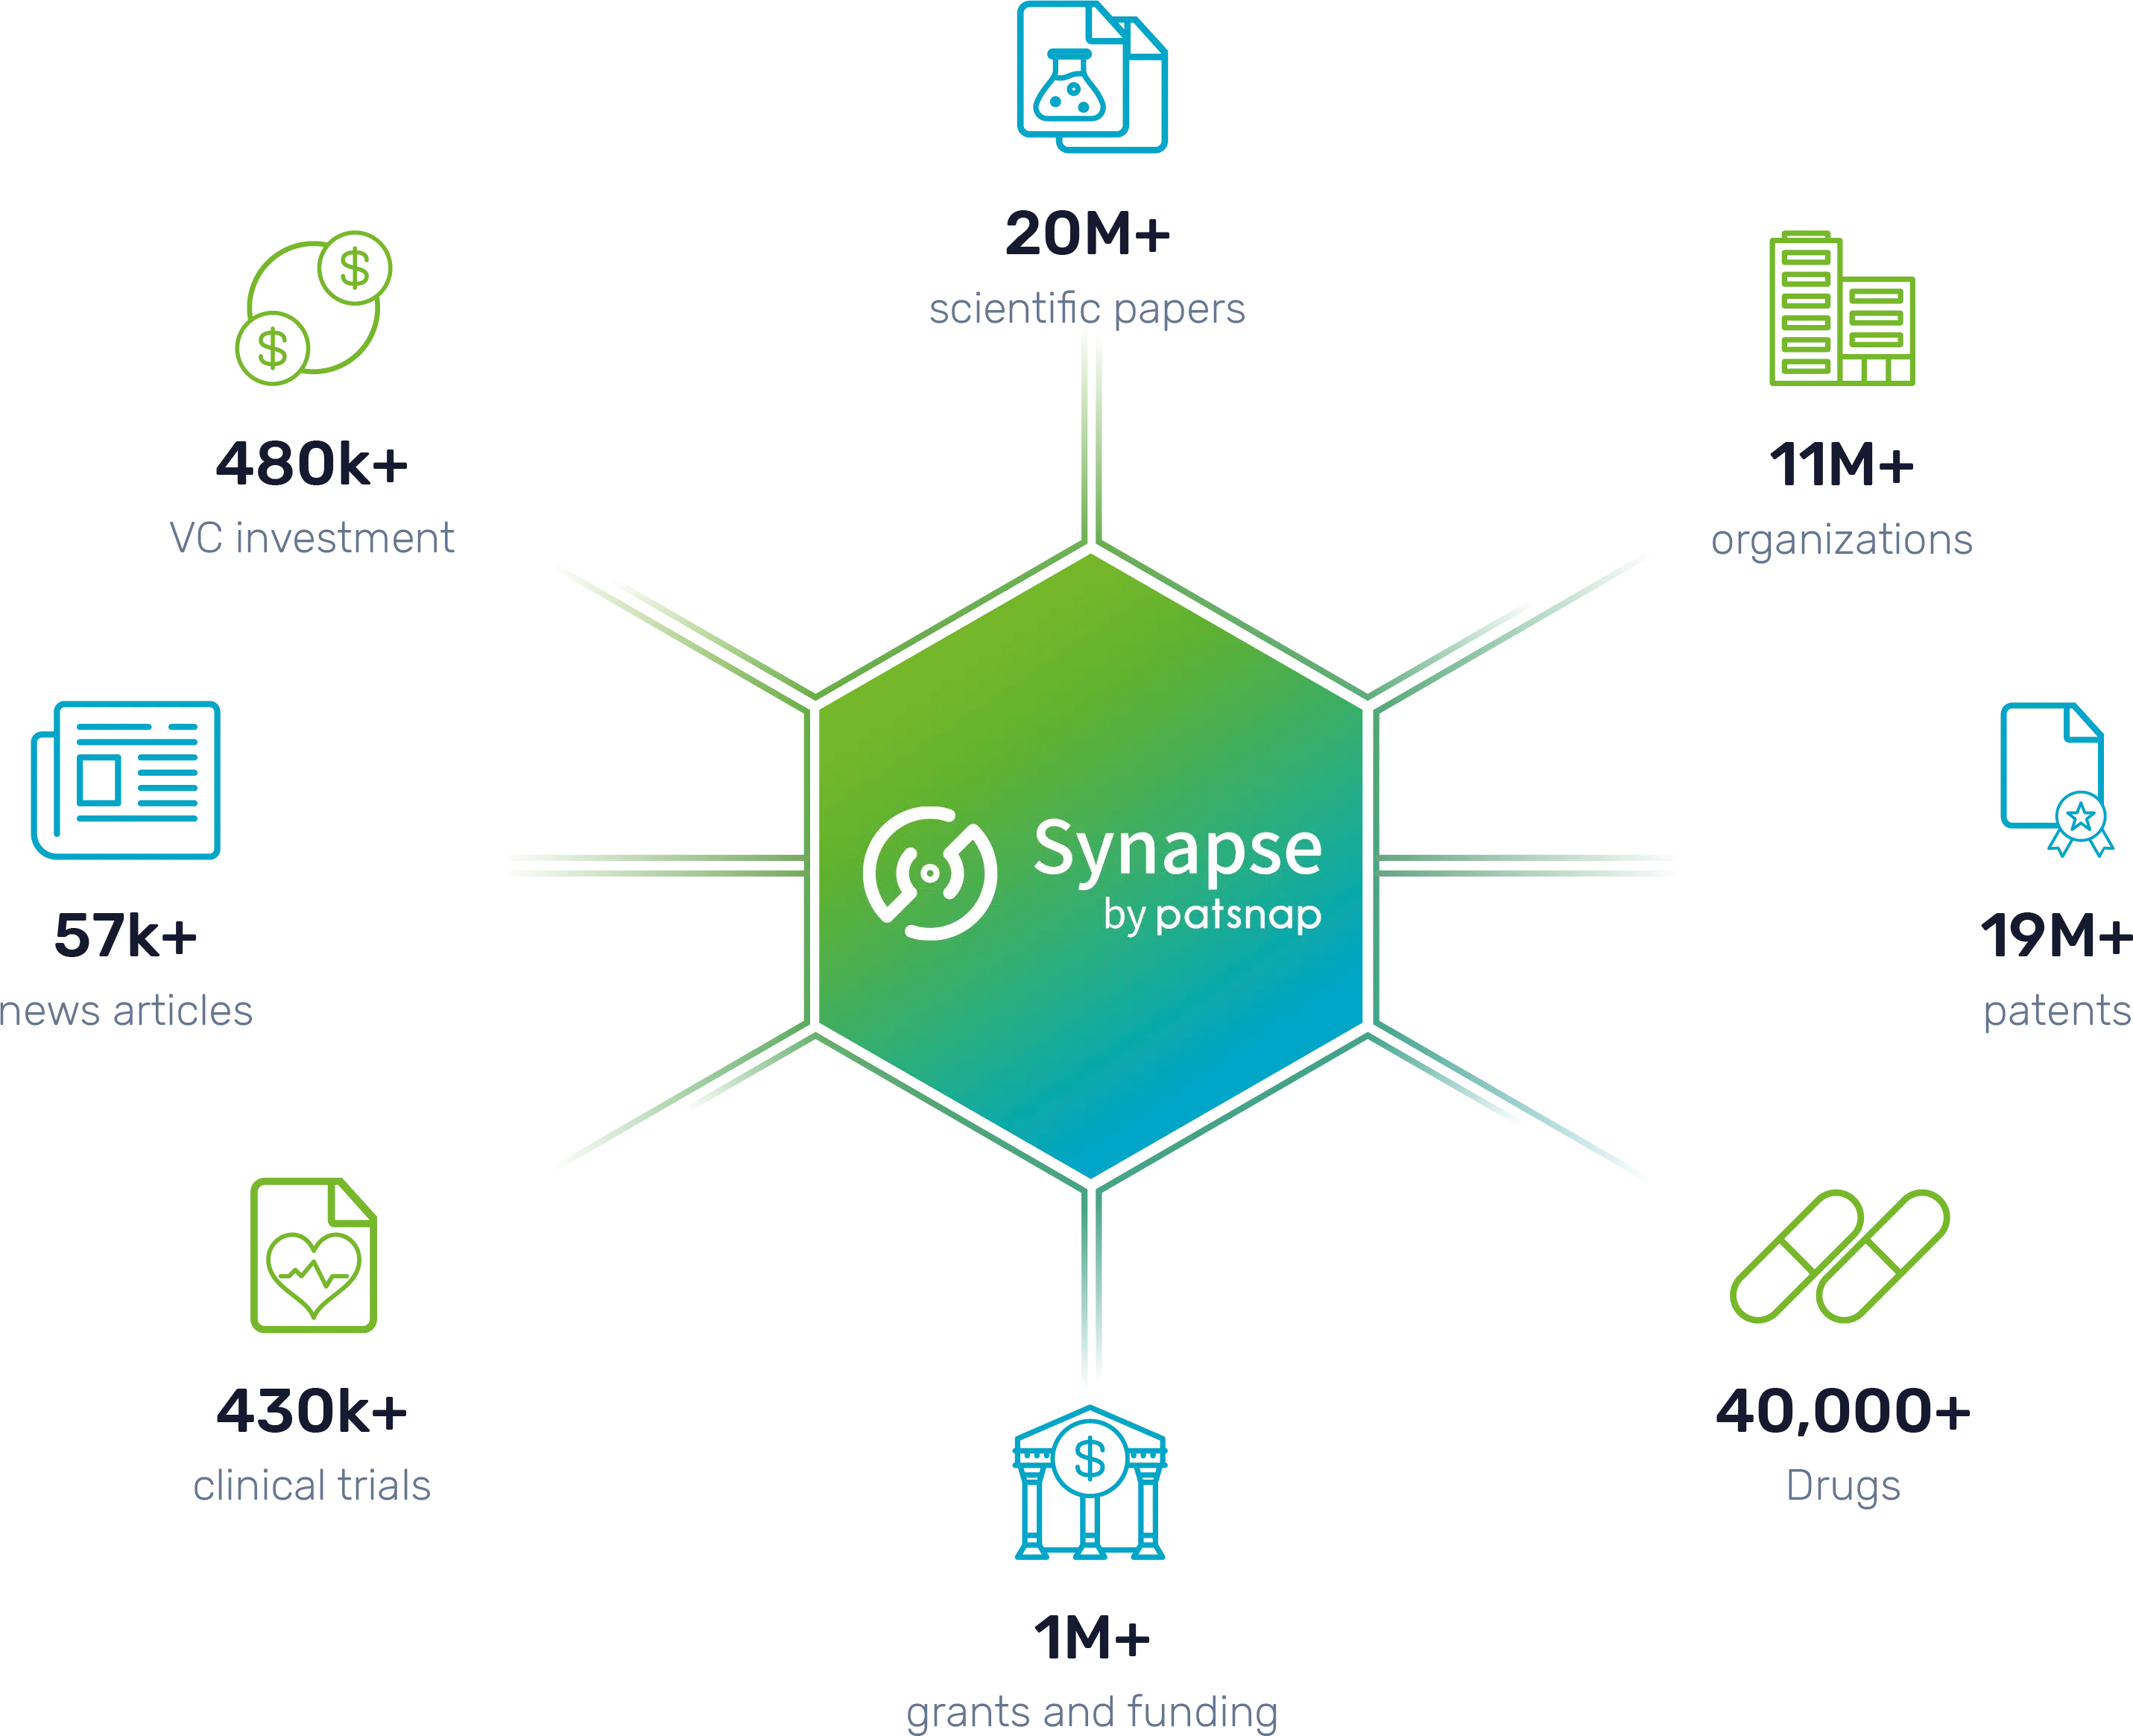 Getting Started - Synapse